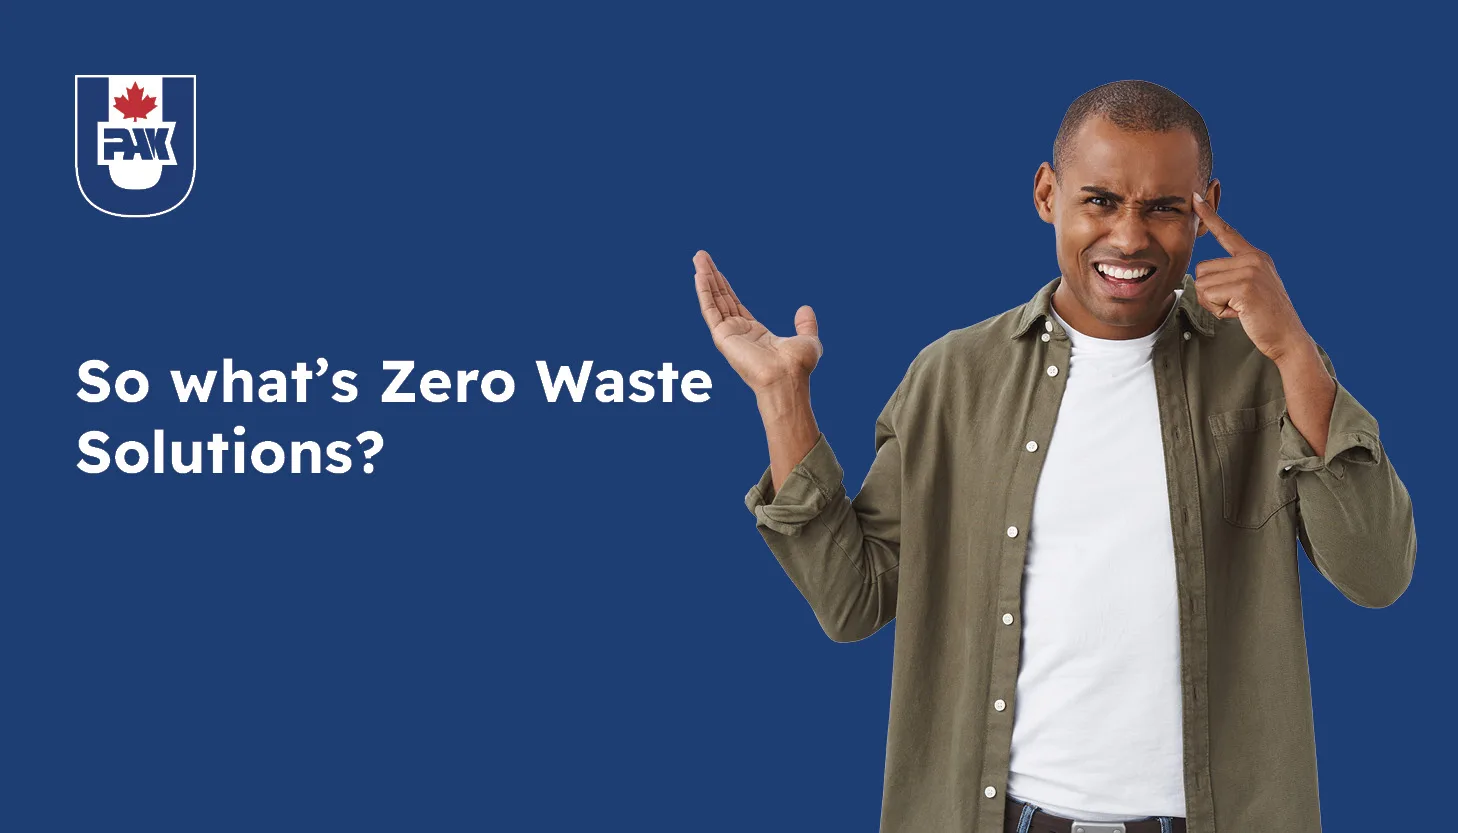 What’s Zero Waste Solutions?